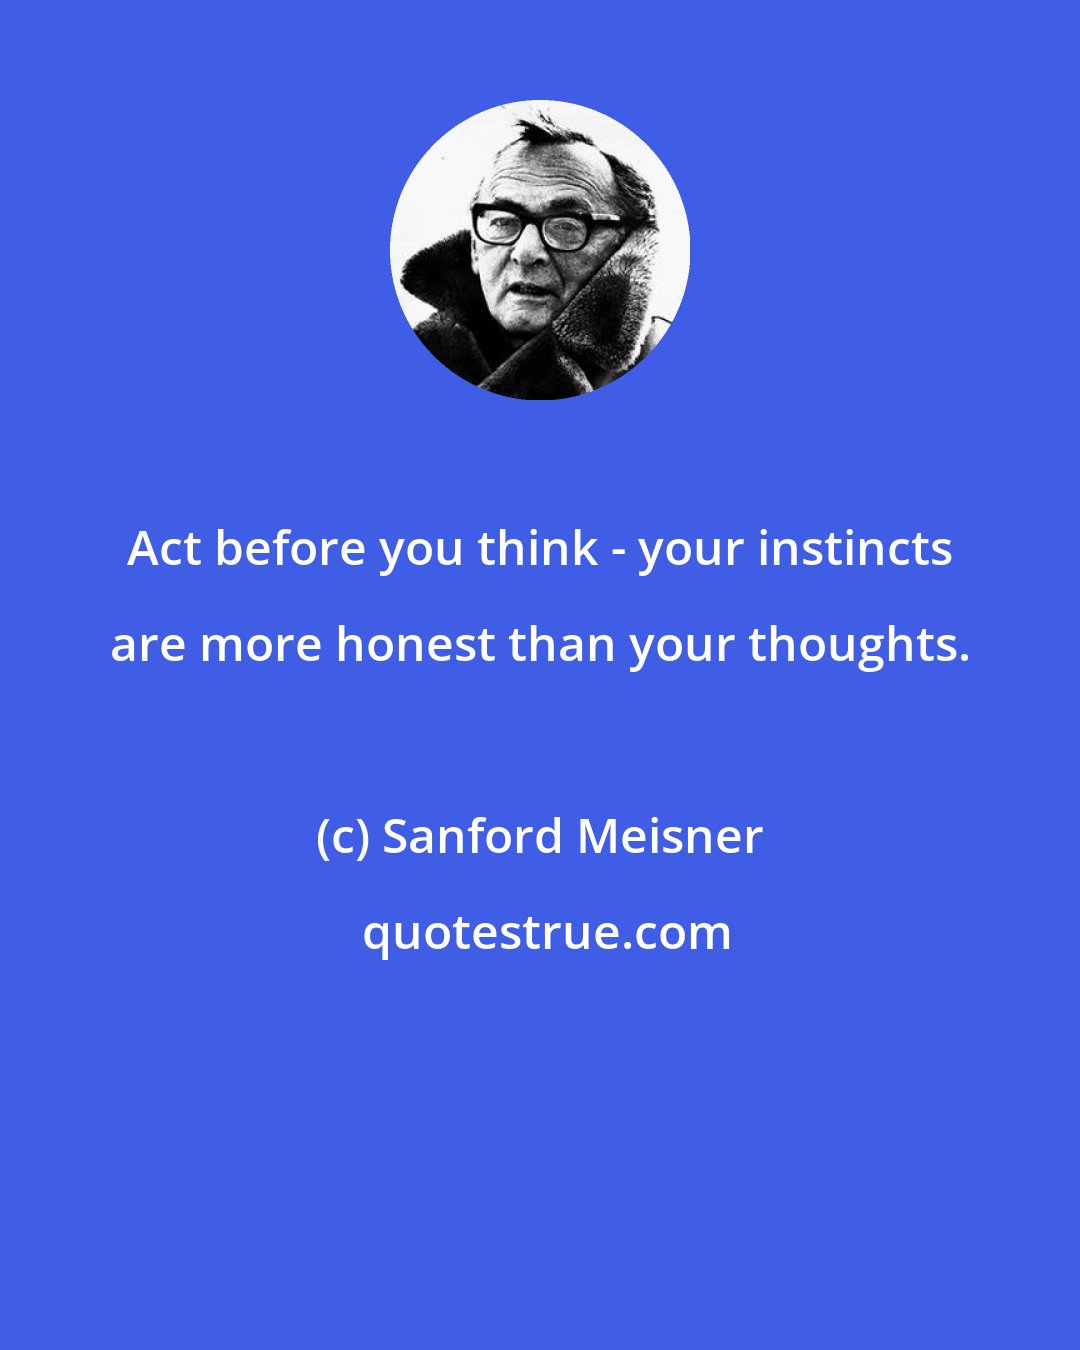 Sanford Meisner: Act before you think - your instincts are more honest than your thoughts.